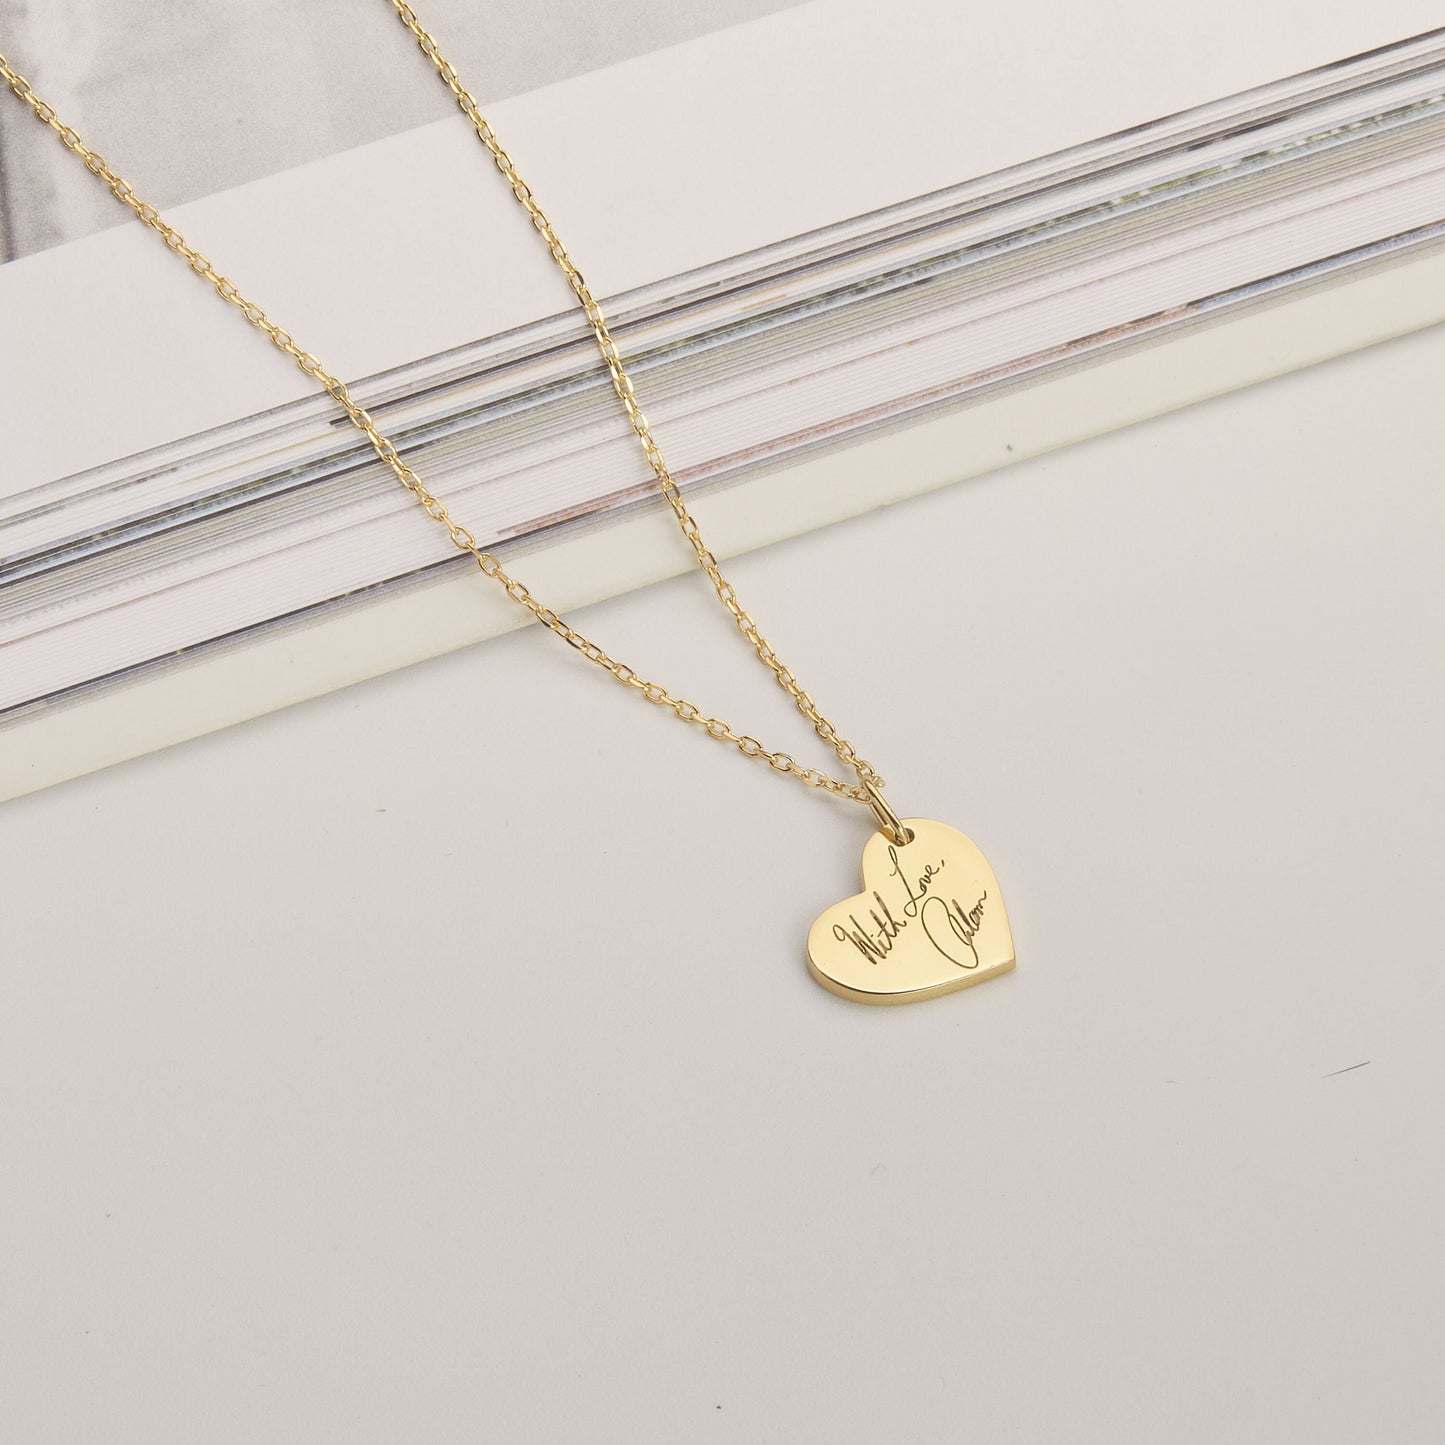 Valentine Gift for her | Signature necklace | Remembrance necklace | Fingerprint Heart Necklace | Handwriting Necklace | Memorial Necklace